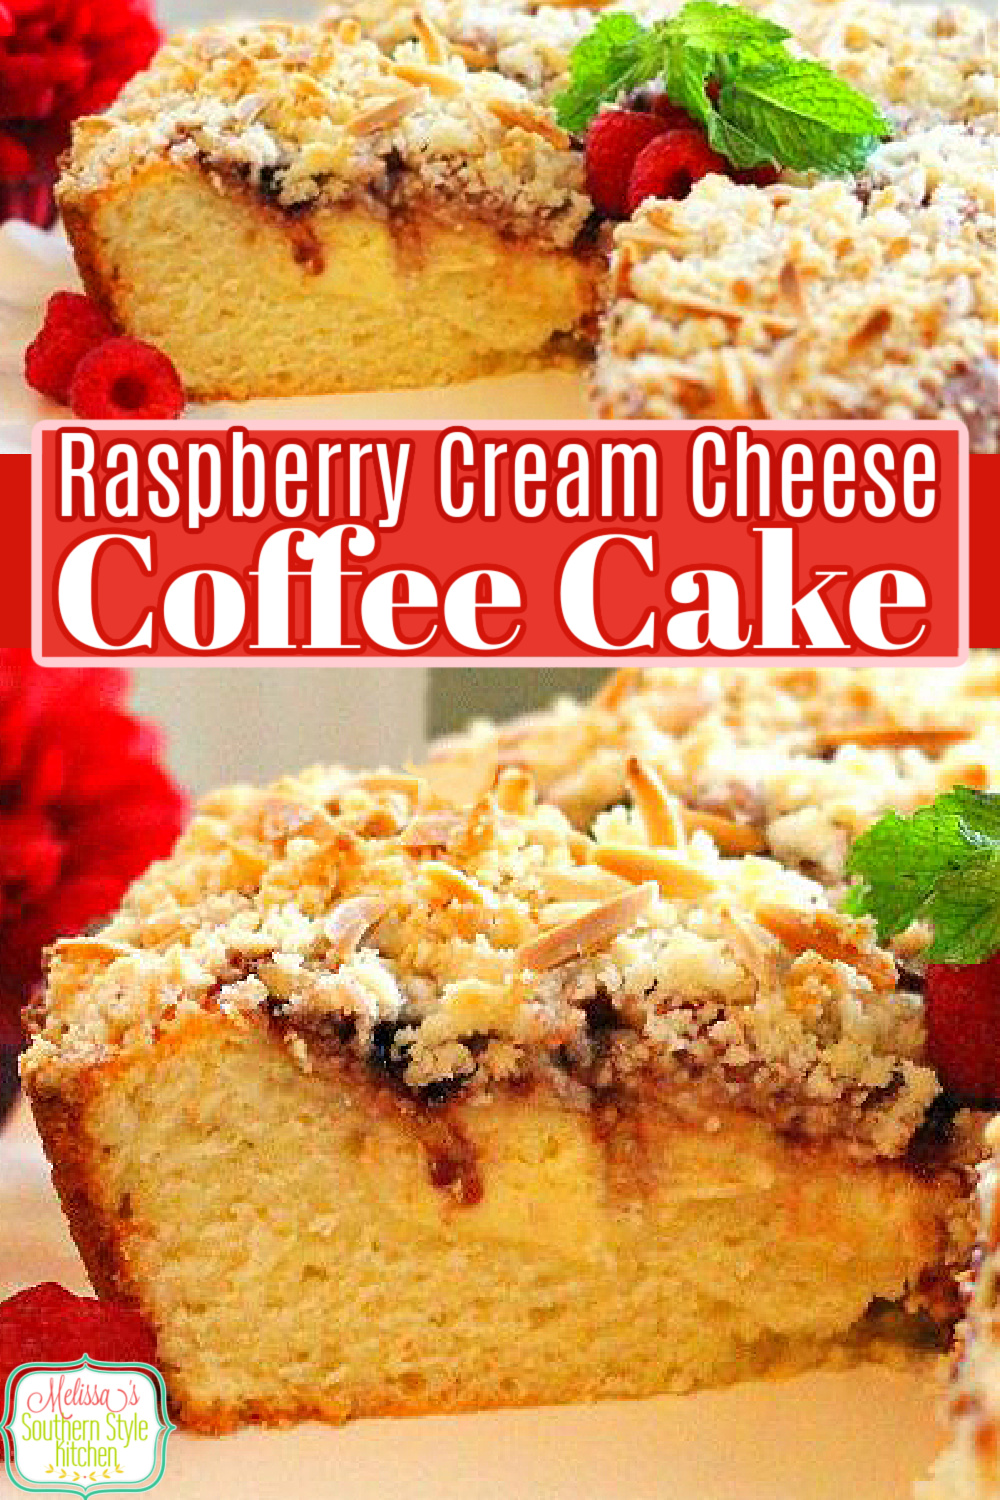 Start your day with a piece of Raspberry Cream Cheese Coffee Cake #coffeecale #raspberries #raspberrycoffeecake #cakerecipes #cakes #raspberrypreserves #crumbcakerecipes #holidaybrunch #cake #southerndessertrecipes via @melissasssk